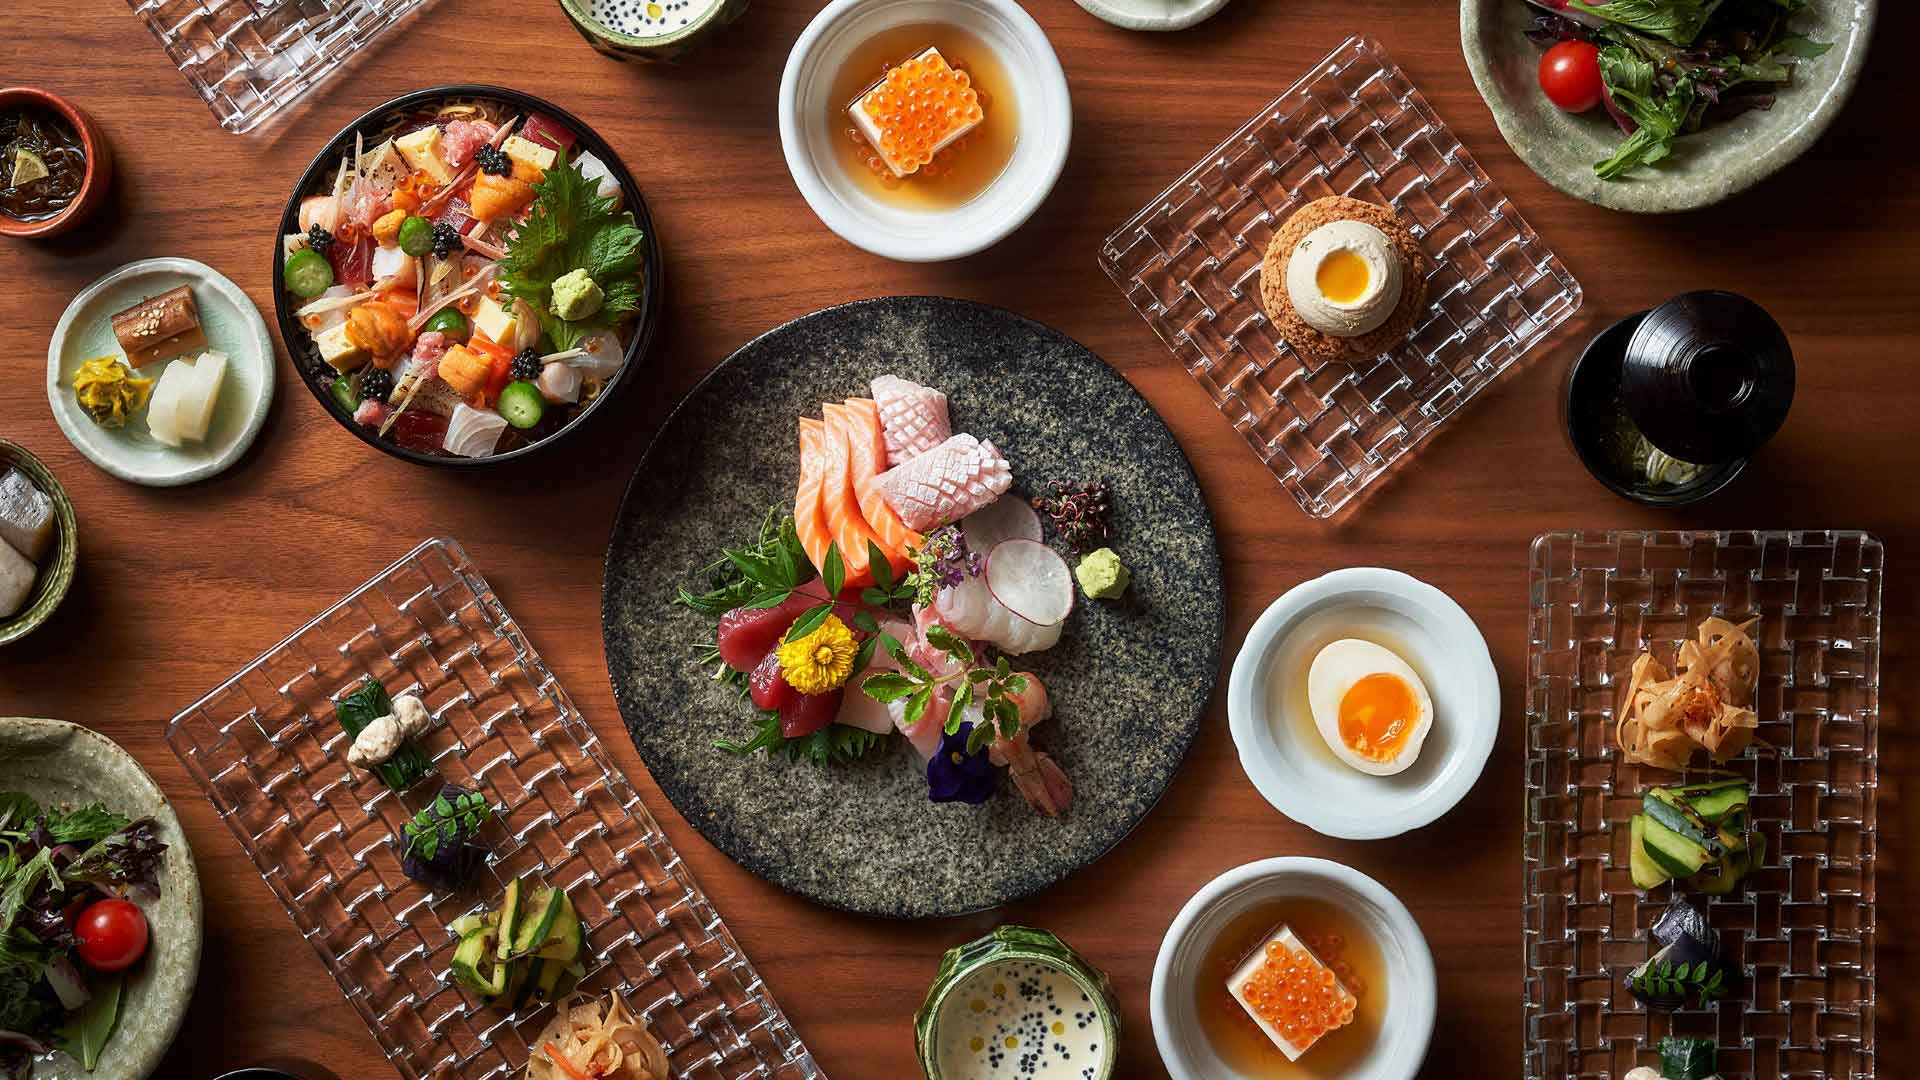 Authentic Japanese set meal at Wakuda, a Japanese fine dining restaurant in Singapore